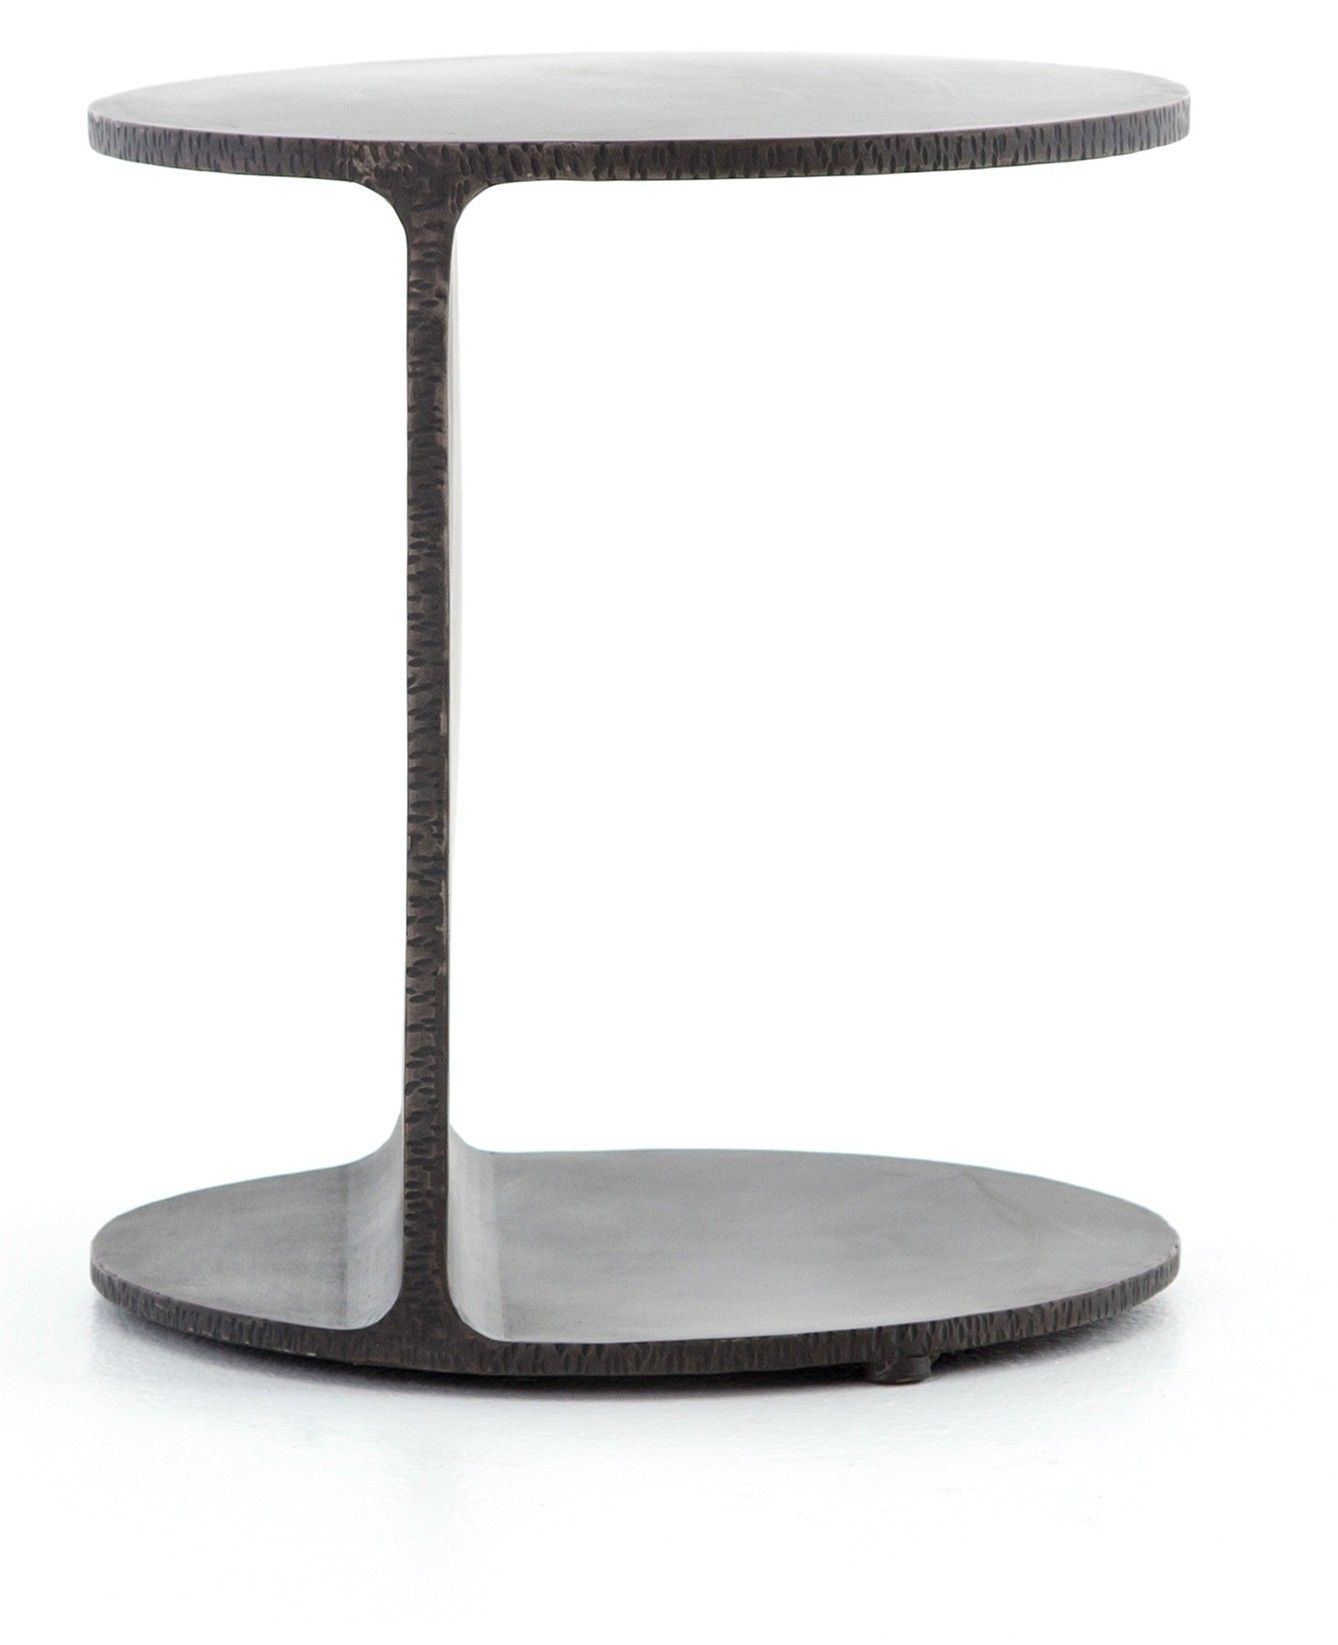 Illy Side Table In 2021 | Side Table, Black Side Table, Metal Side Table With Regard To Metal Side Tables For Living Spaces (View 4 of 20)